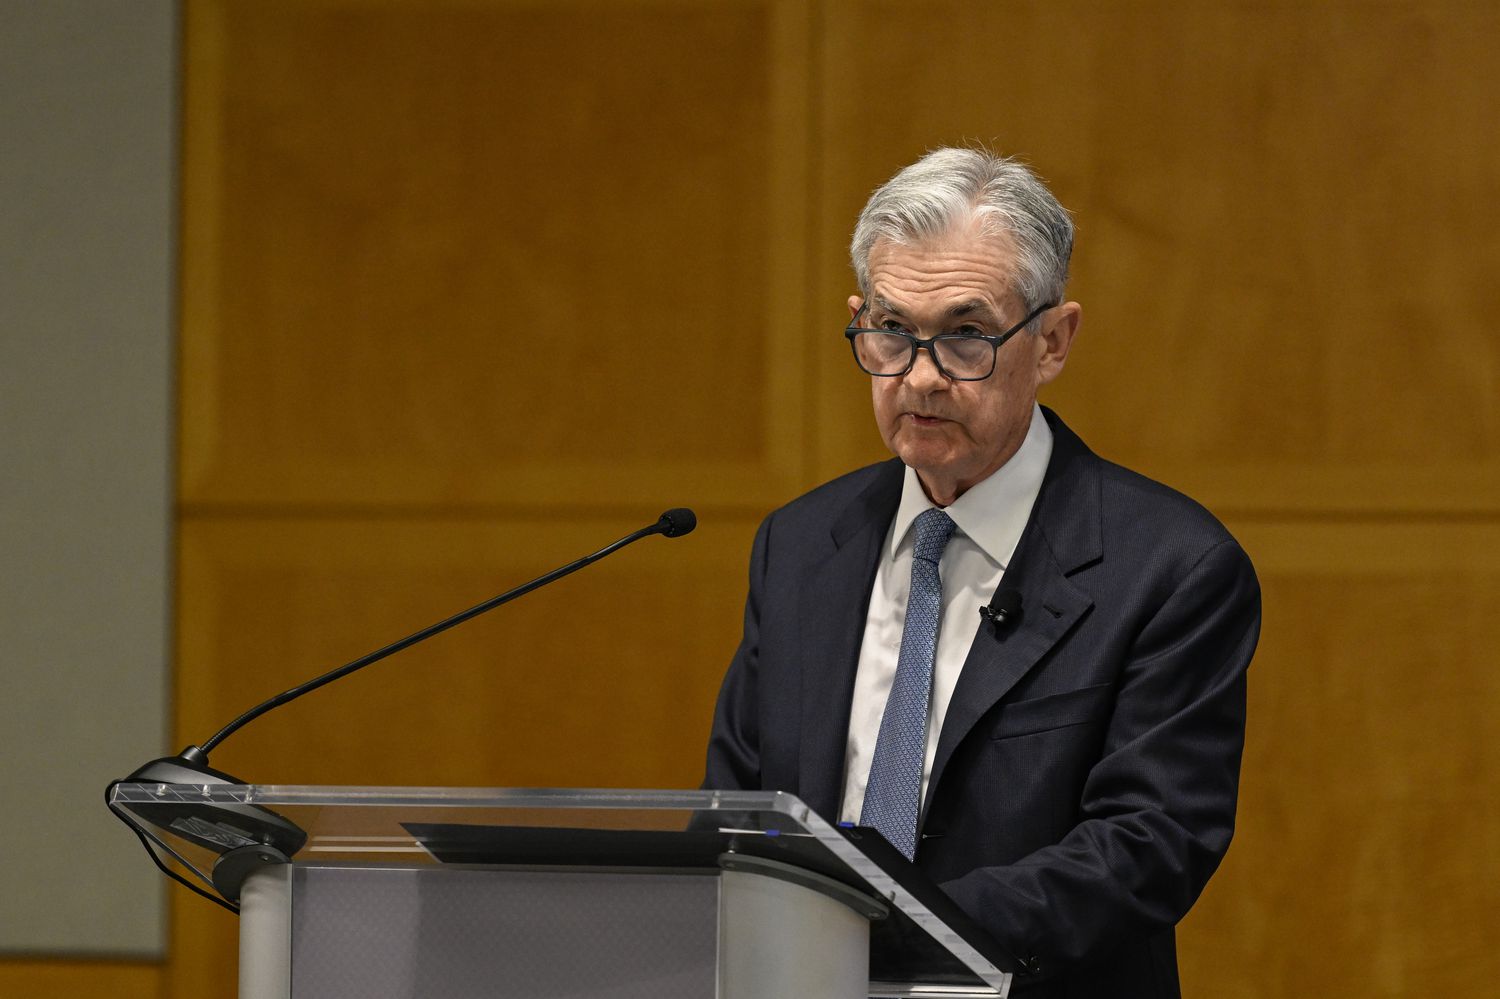 Federal Reserve Chairman Jerome Powell speaks at the IMF Headquarters in Washington.